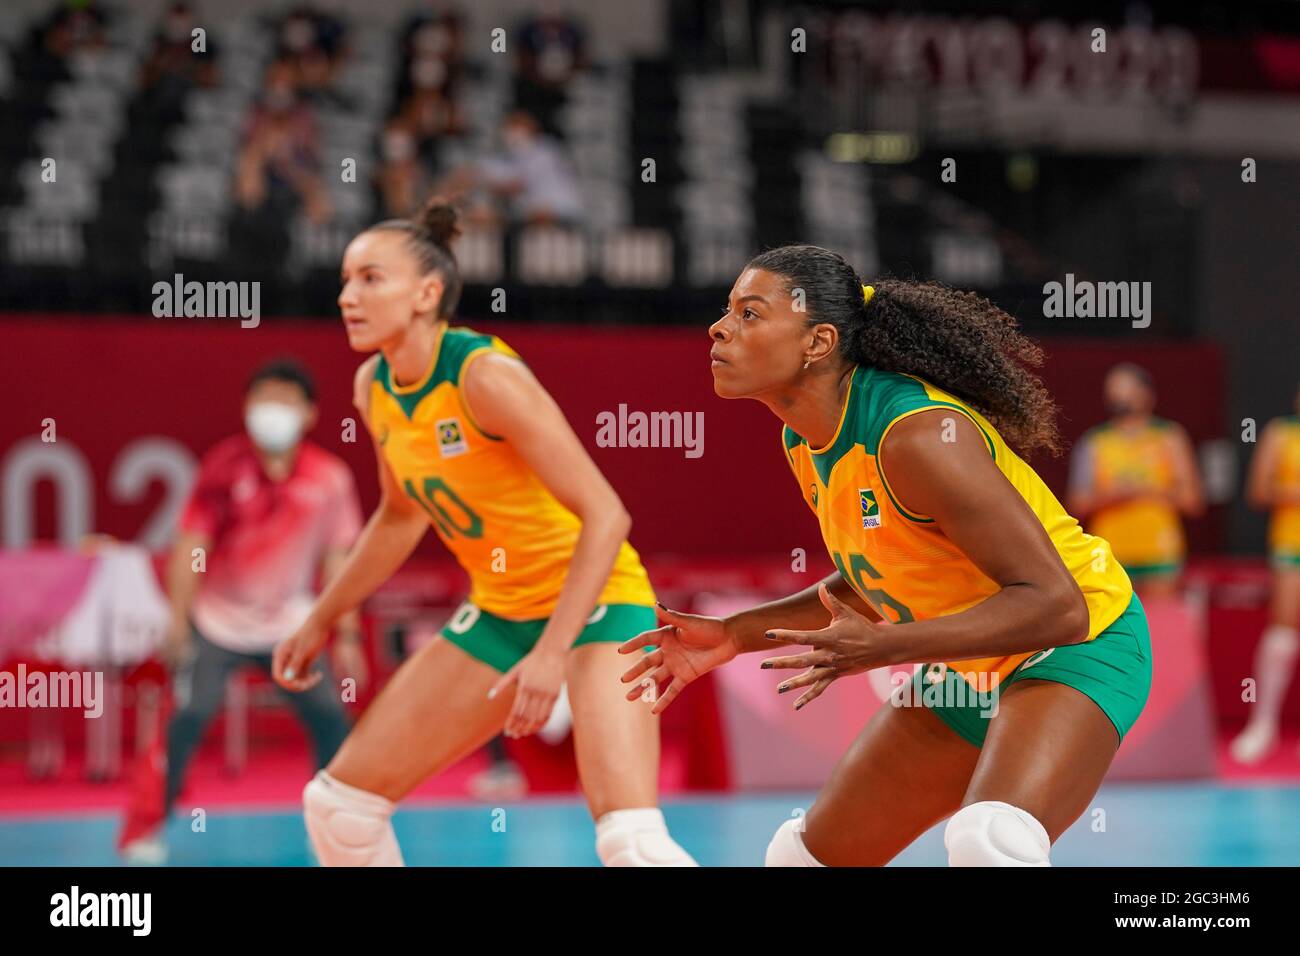 Tokyo, Japan. 06th Aug, 2021. T'QUIO, TO - 06.08.2021: TOKYO 2020 OLYMPIAD  TOKYO - Rosamaria do Brasil during the Brazil vs South Korea volleyball game  at the Tokyo 2020 Olympic Games held